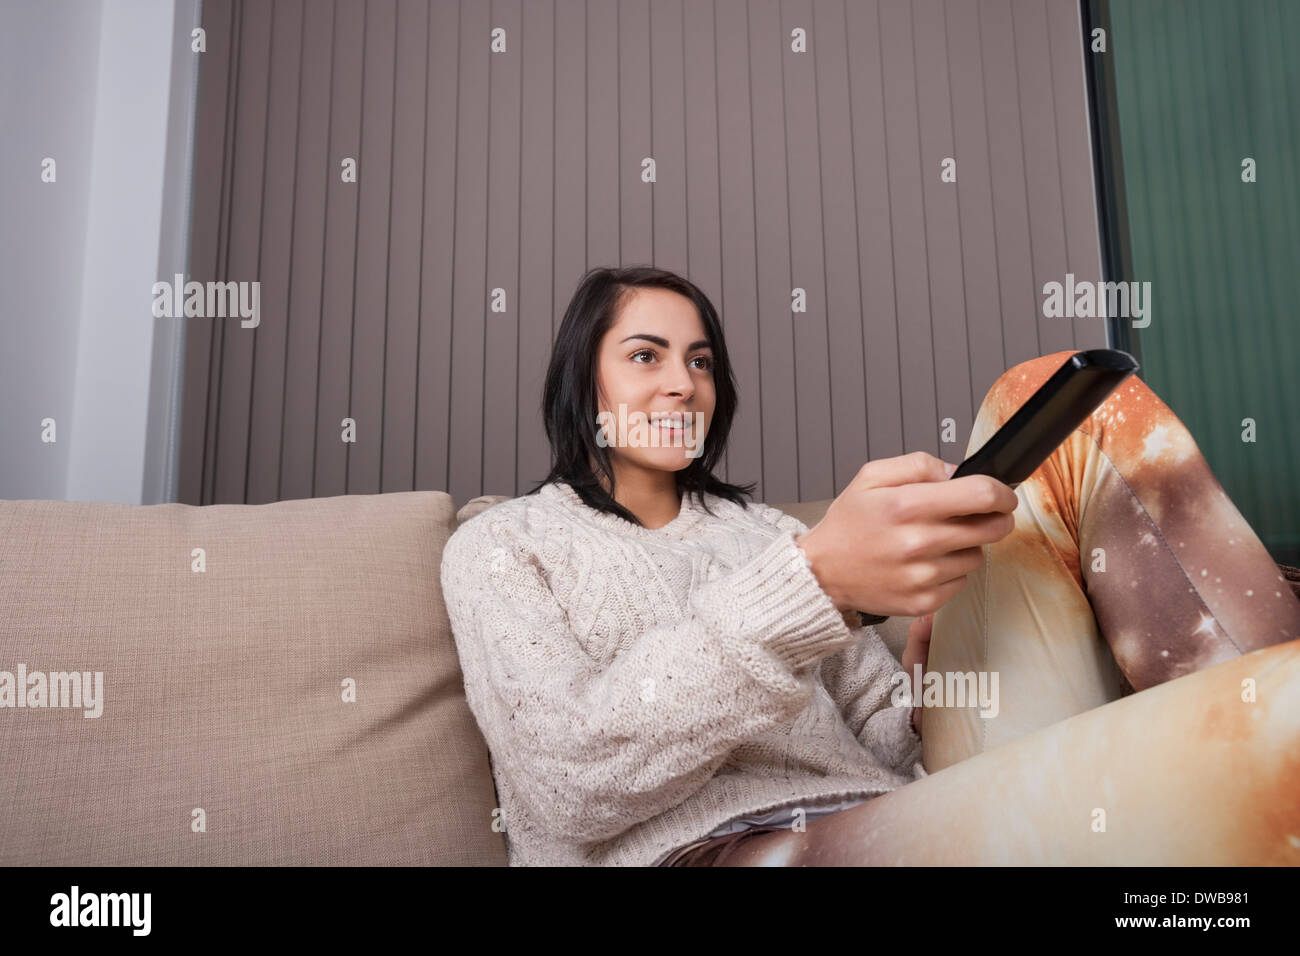 Young woman watching TV in living room Stock Photo